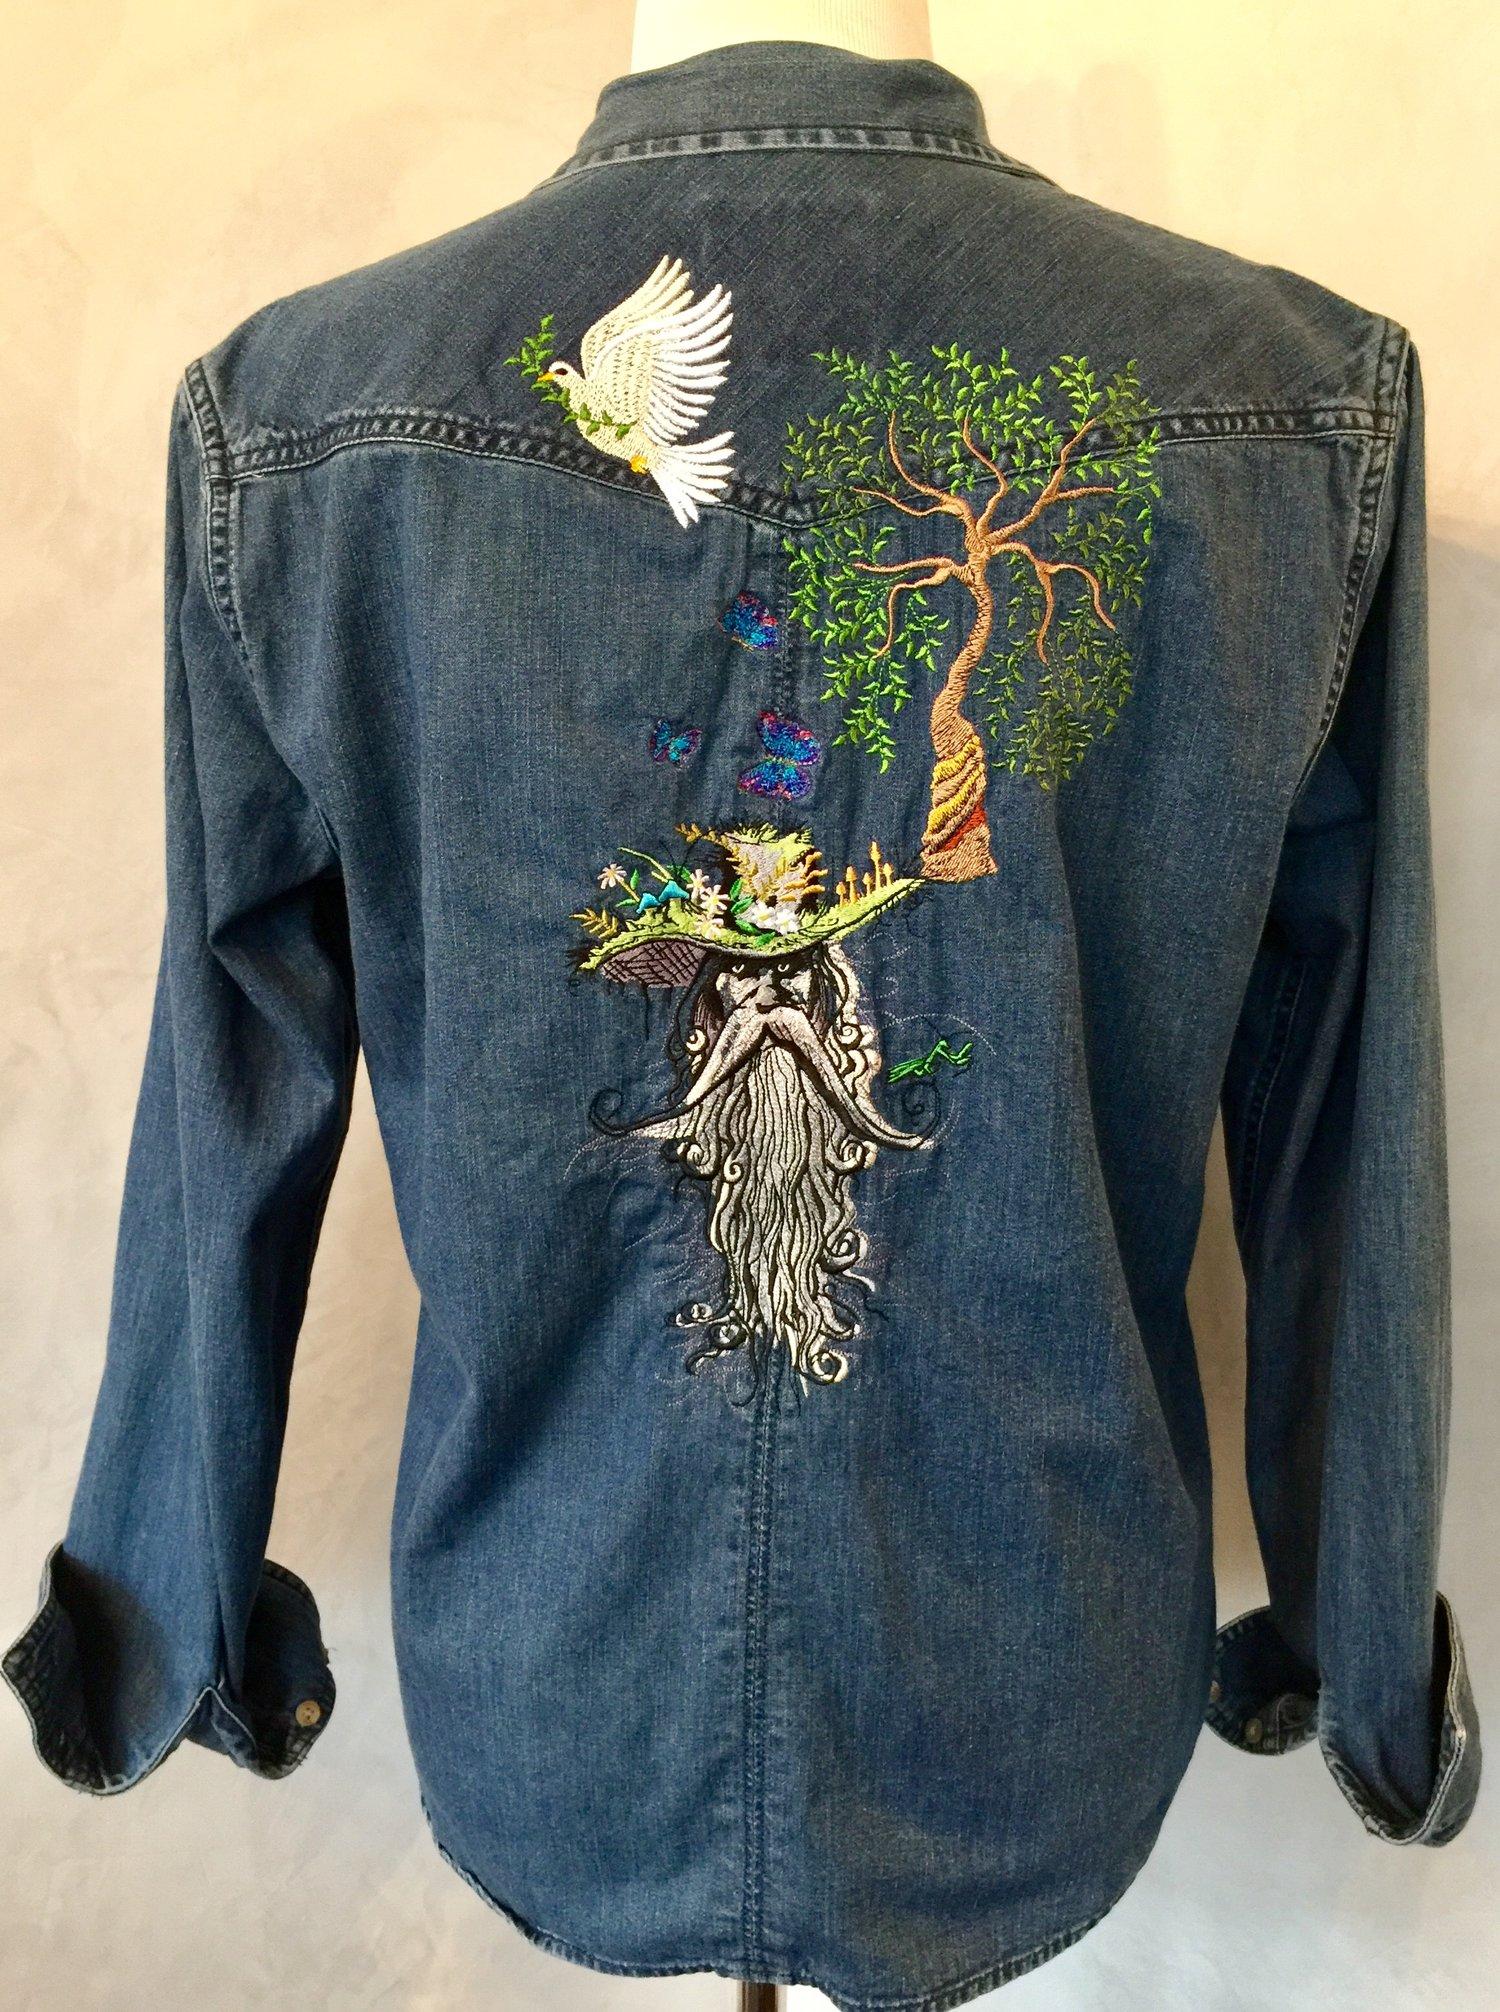 Embroidered jeans jacket with Rootman design